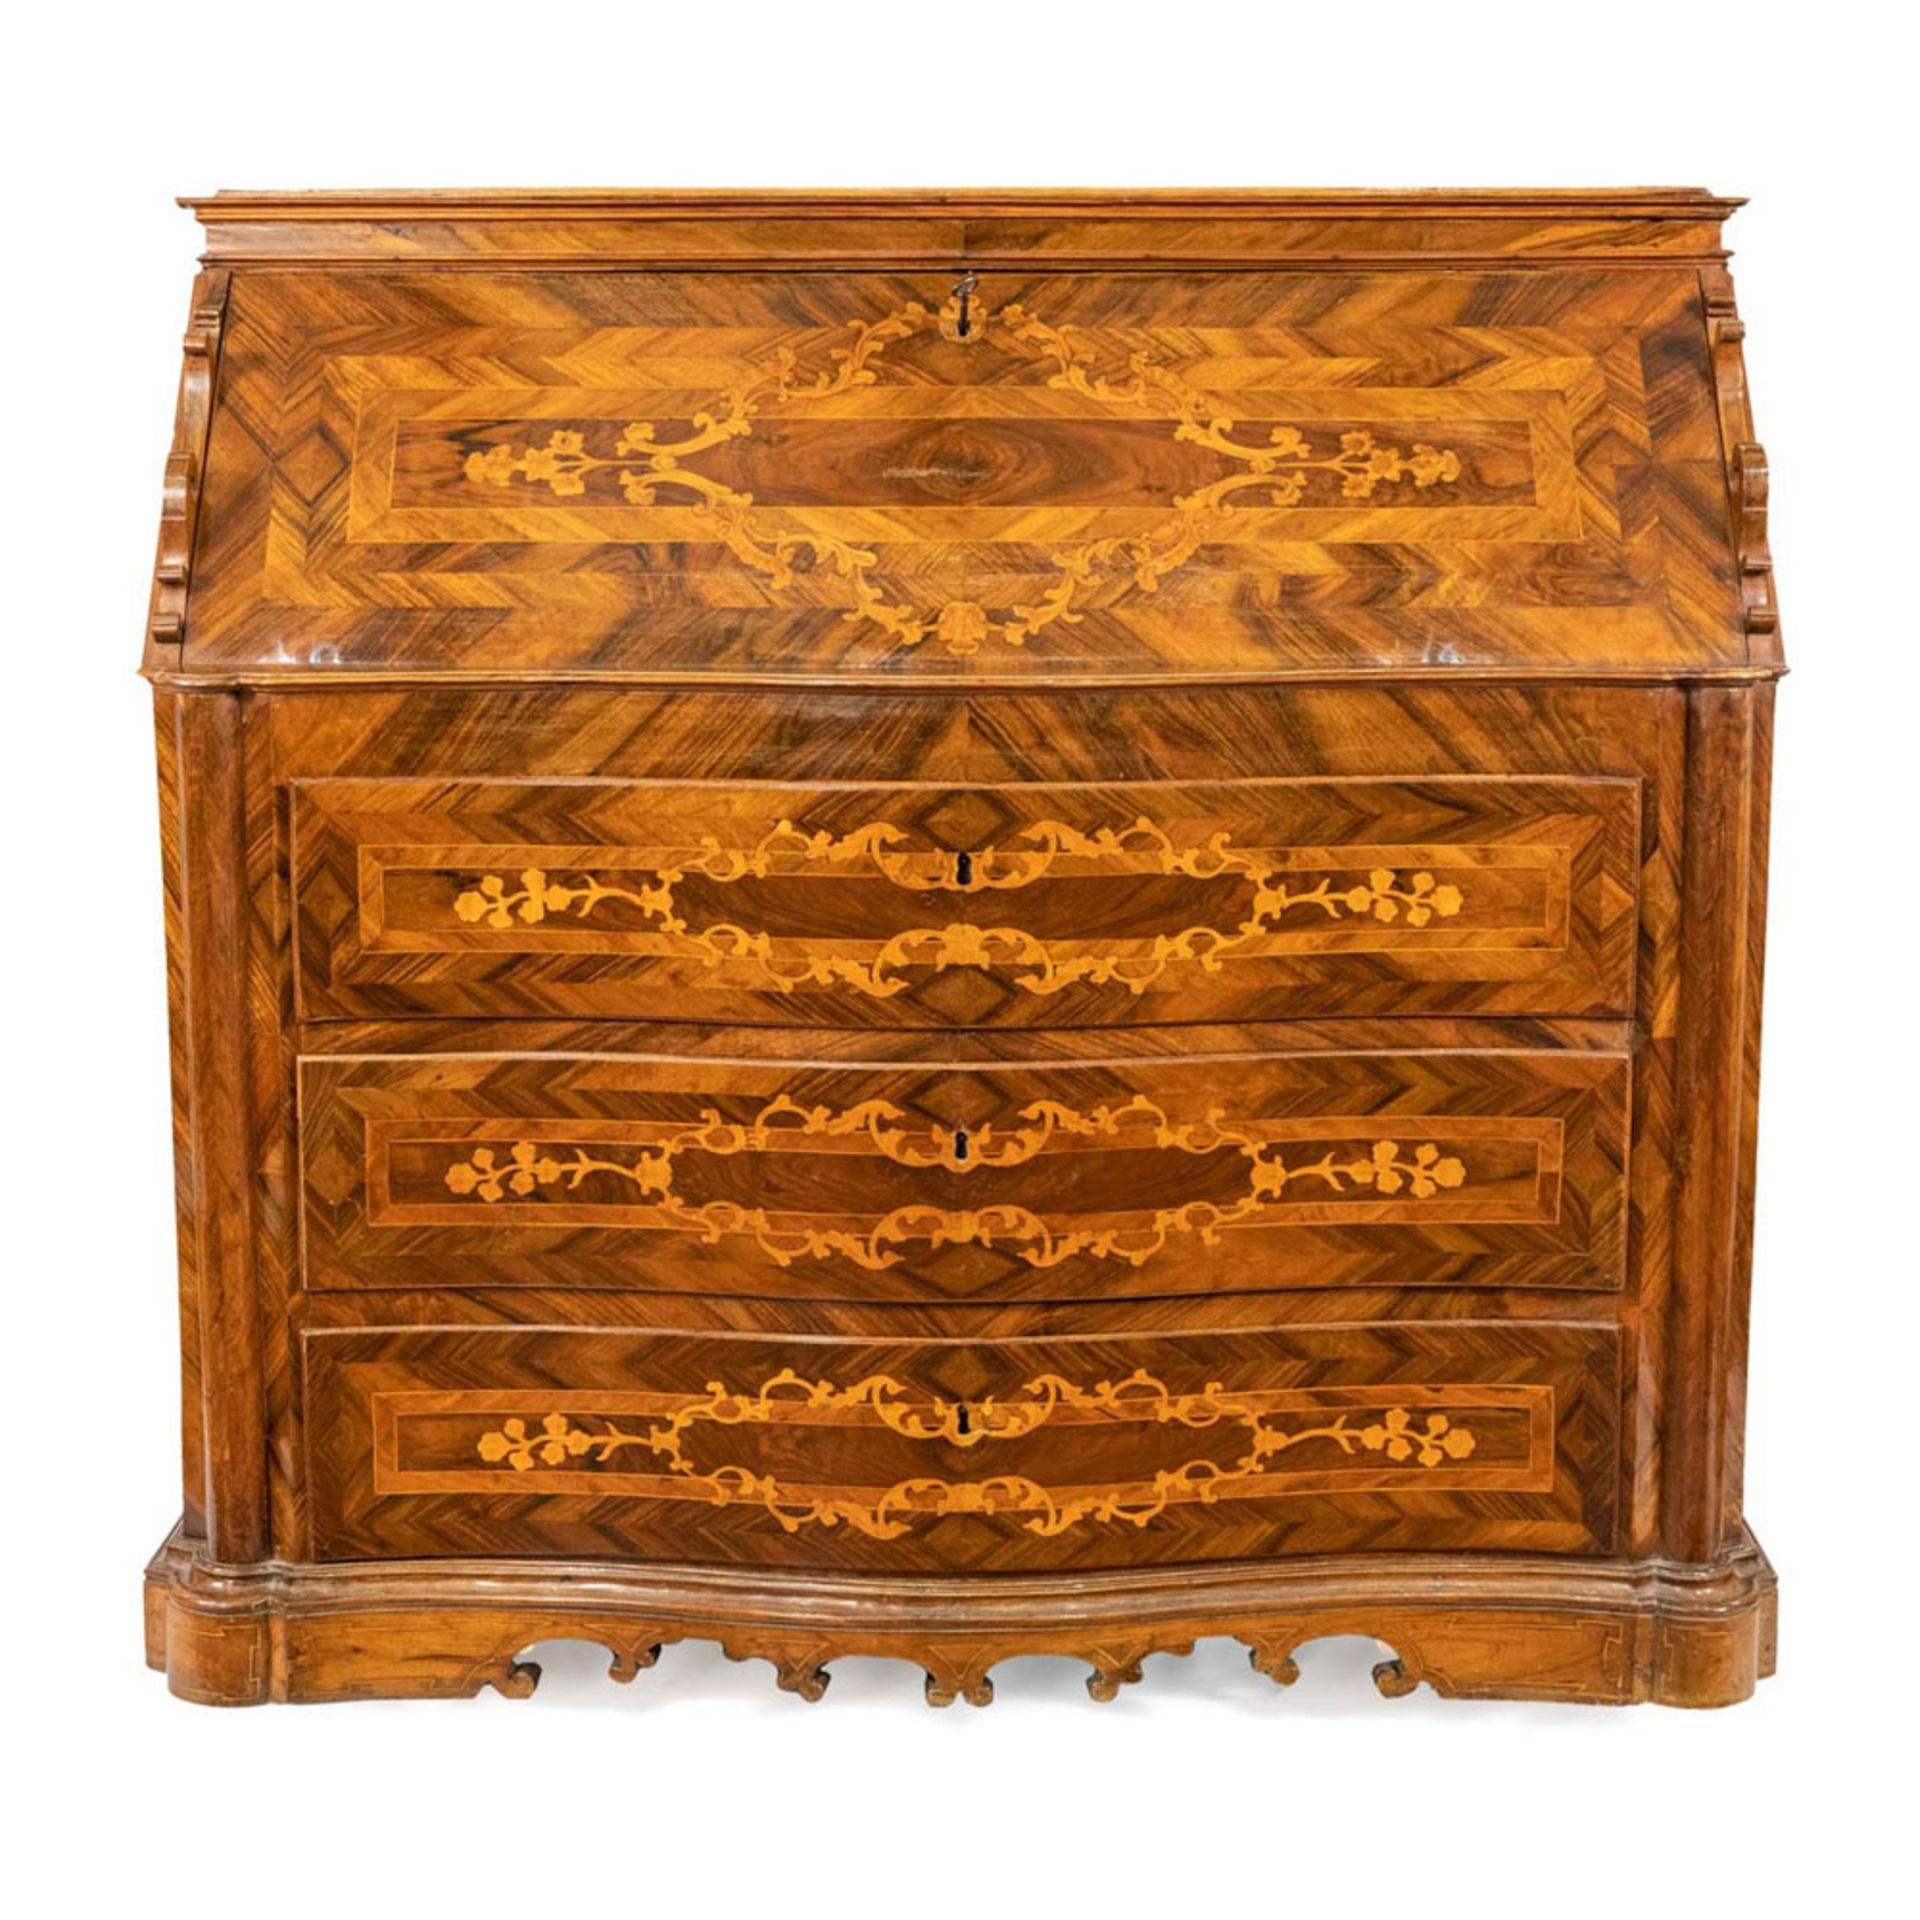 Chest of drawers in various woods